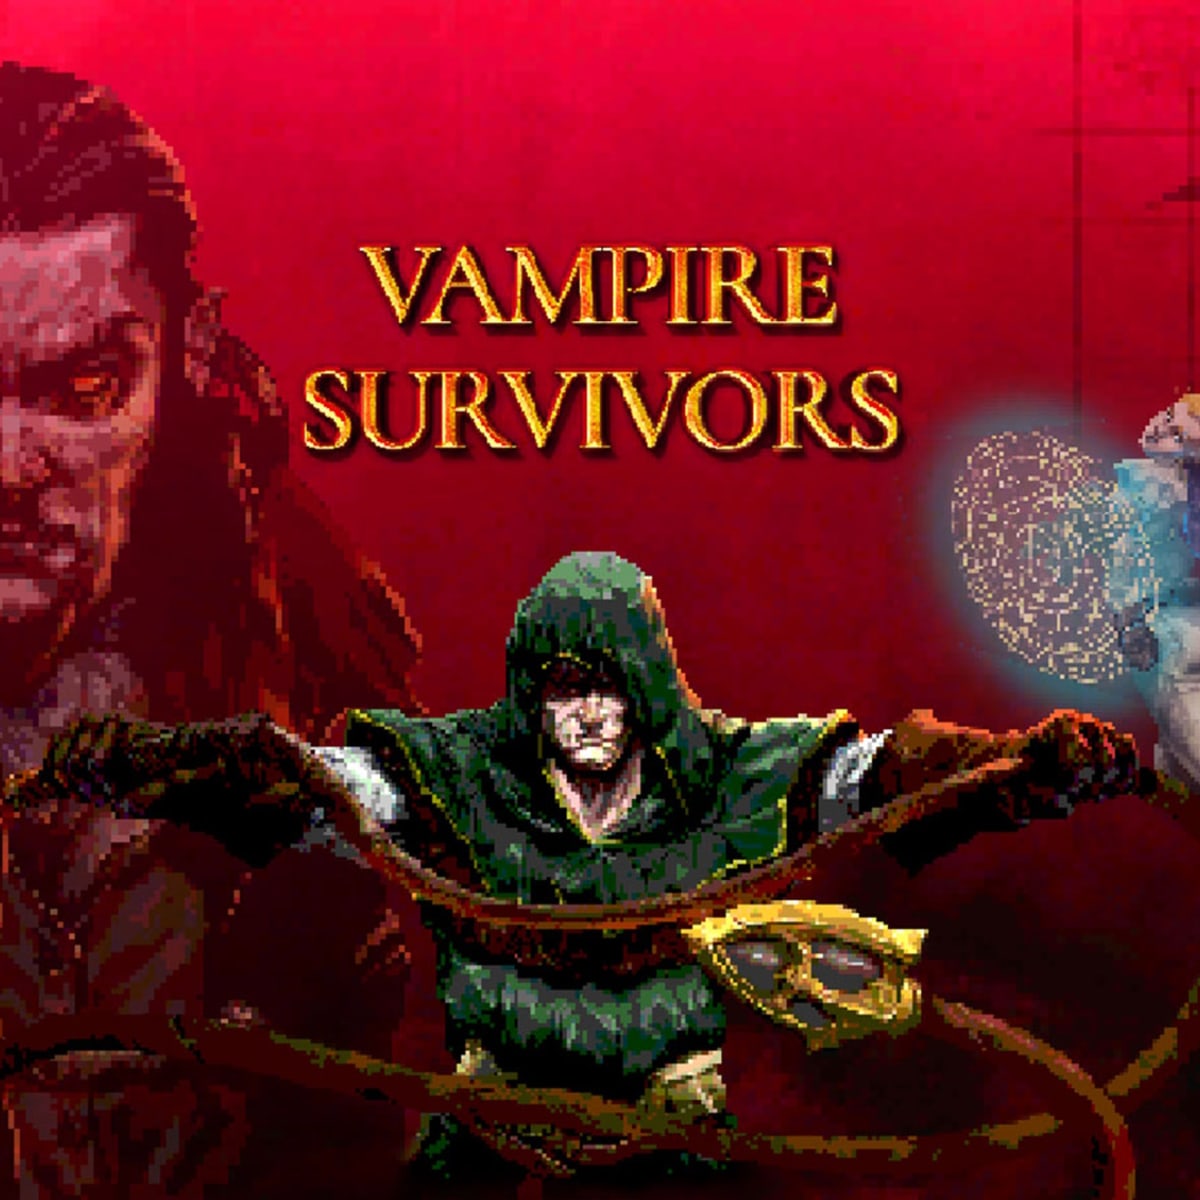 Vampire Survivors 2 Is Unlikely, Would Have To Offer Something